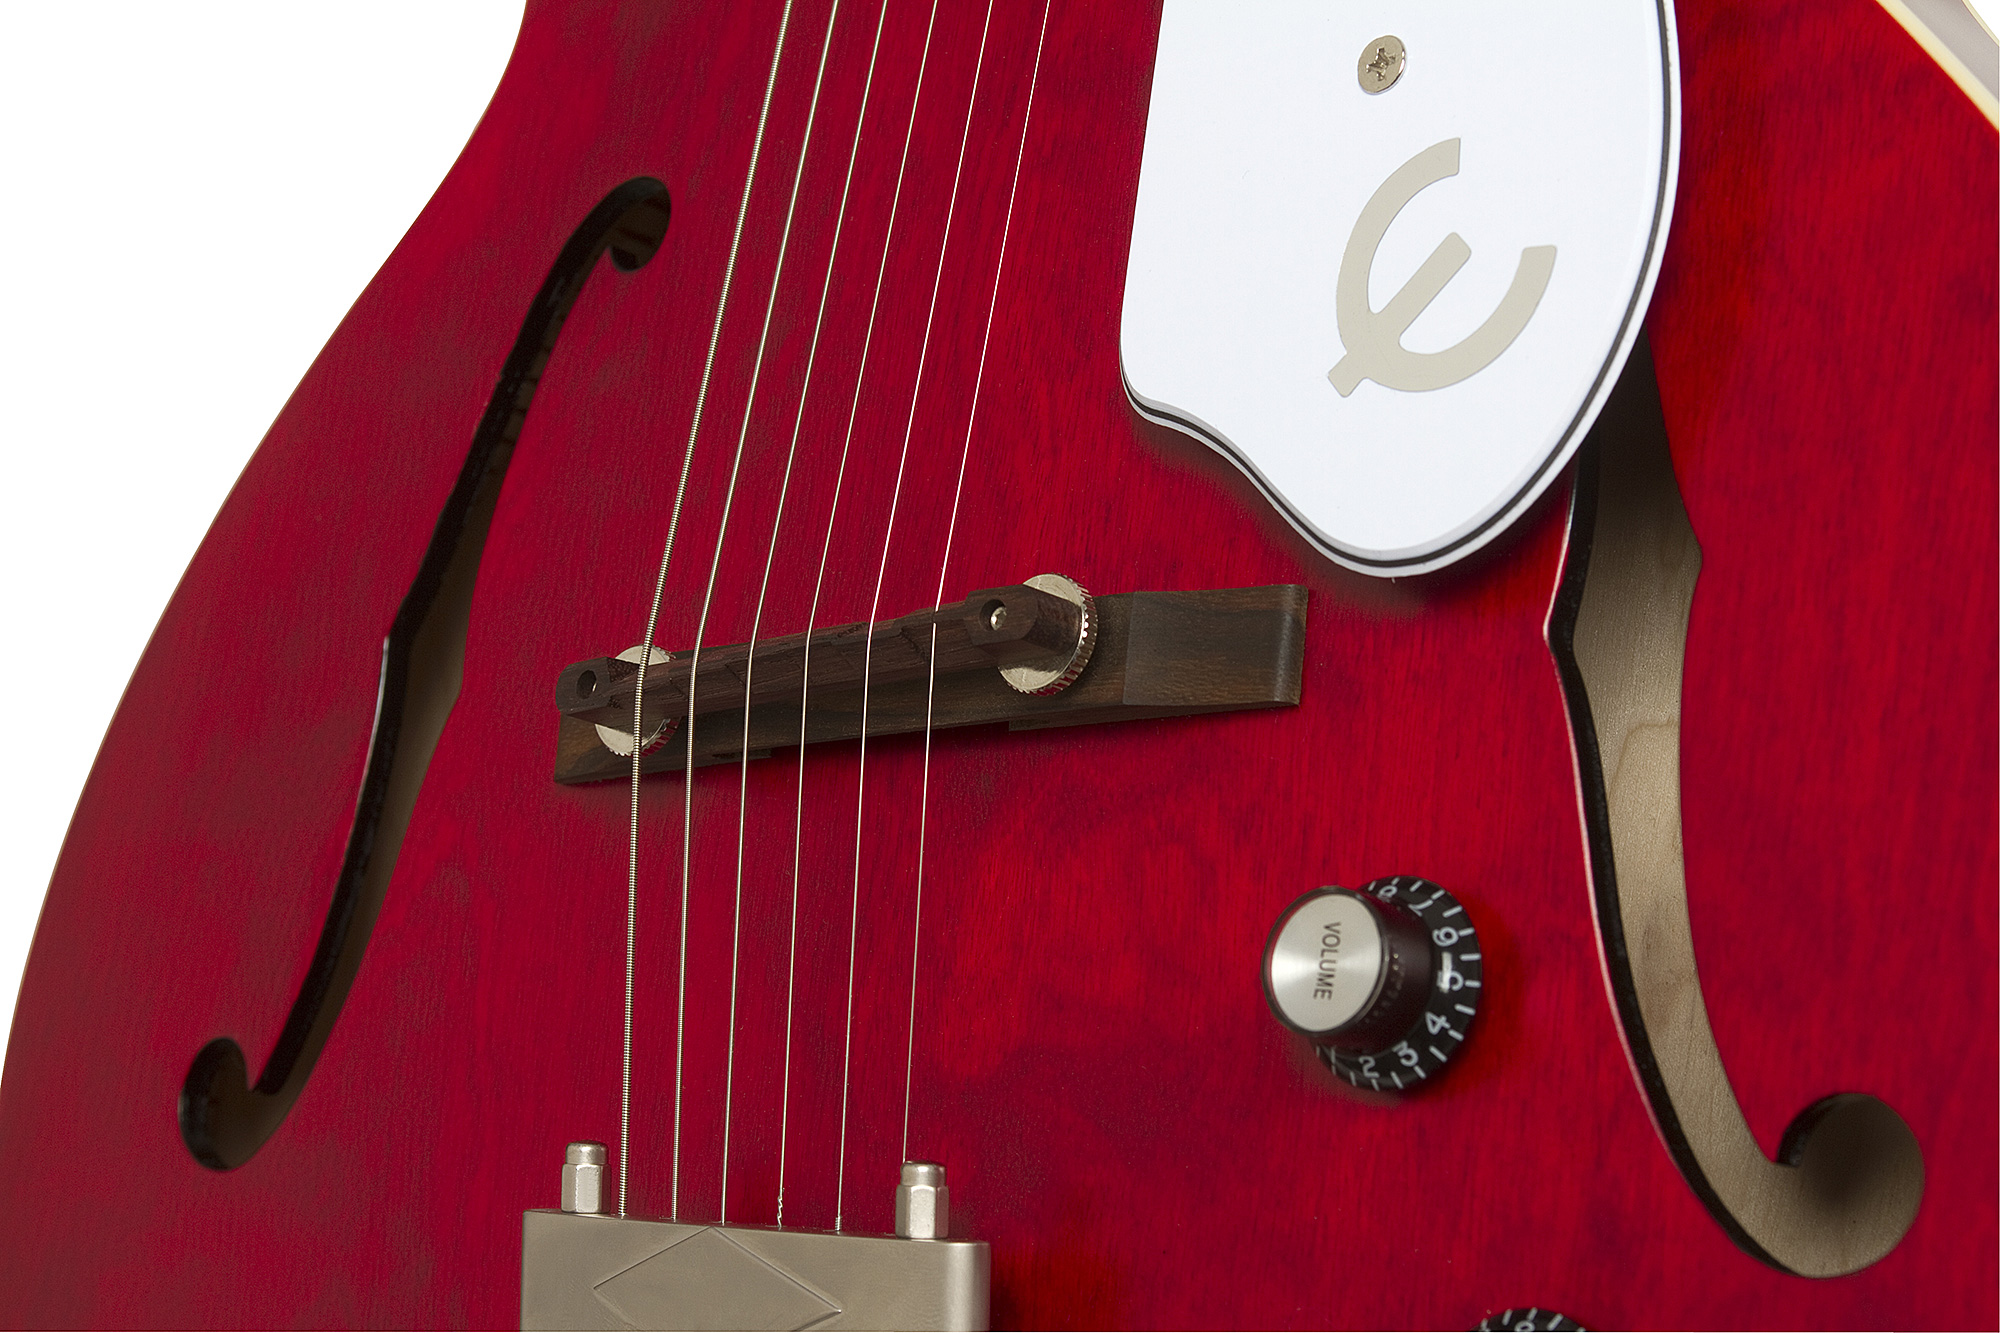 Epiphone Inspired By 1966 Century 2016 - Aged Gloss Cherry - Guitarra eléctrica semi caja - Variation 3